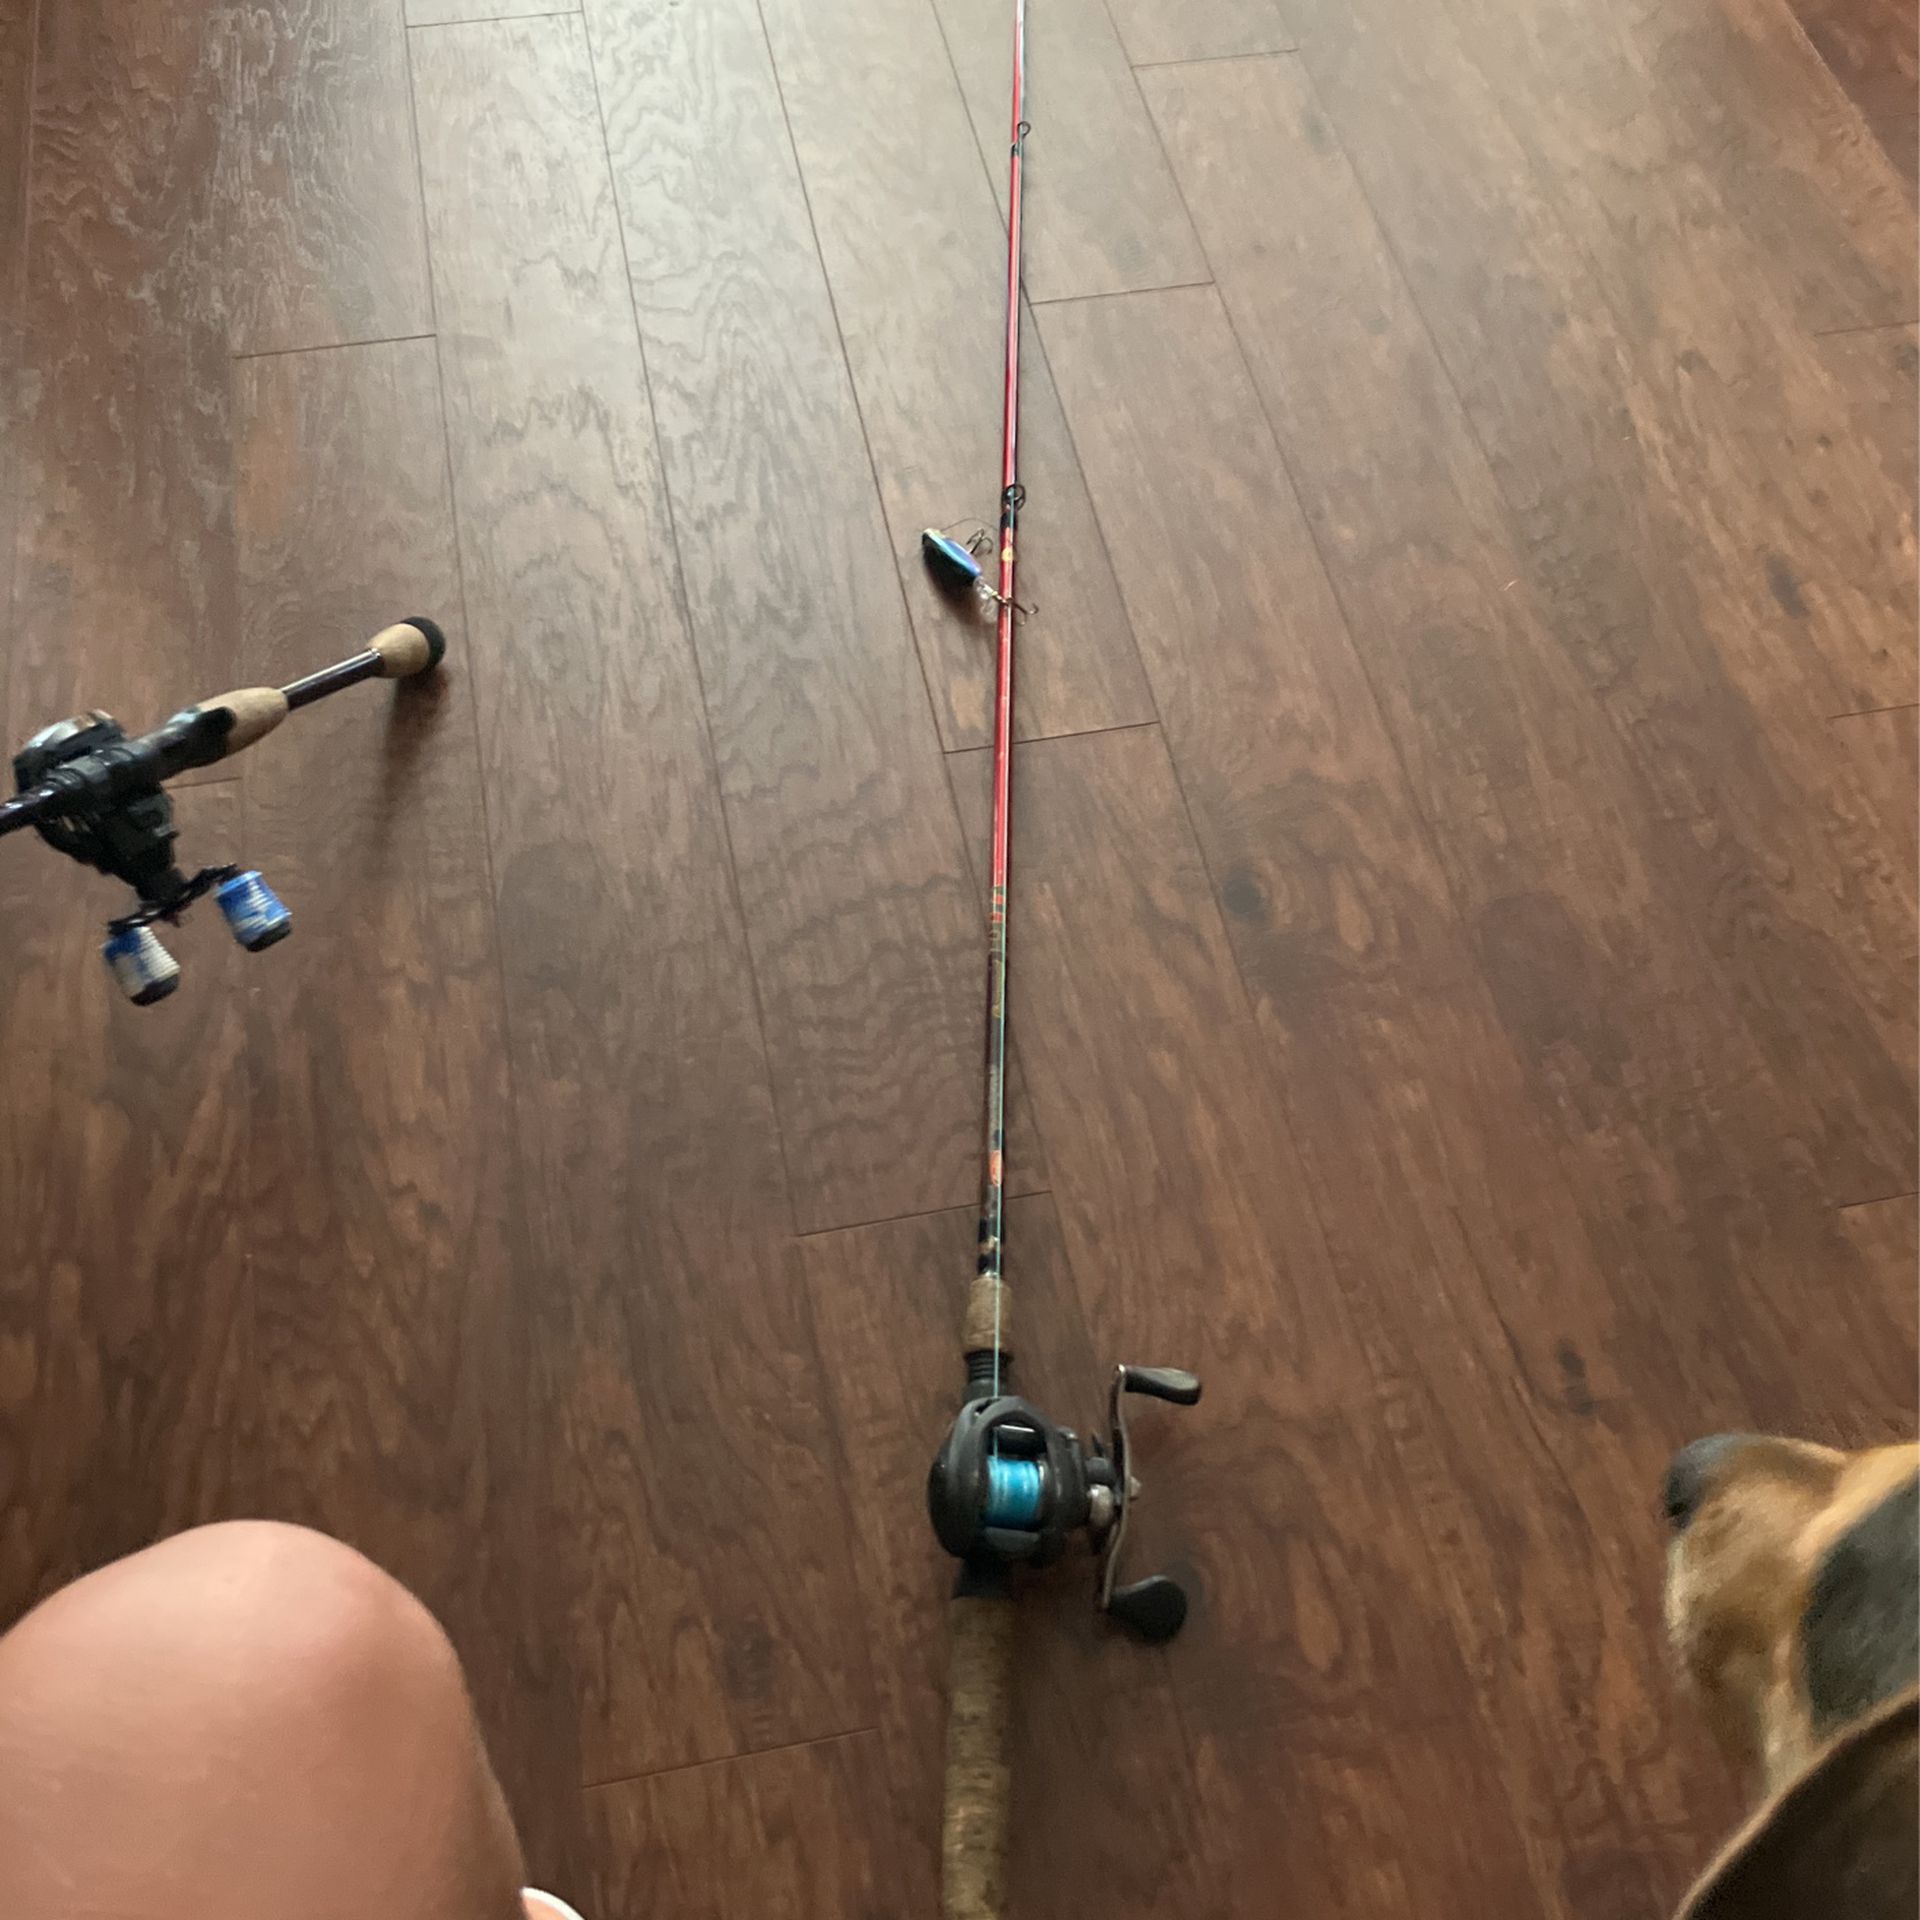 Lews, fishing reel, and Barkley fishing rod for Sale in Spring, TX